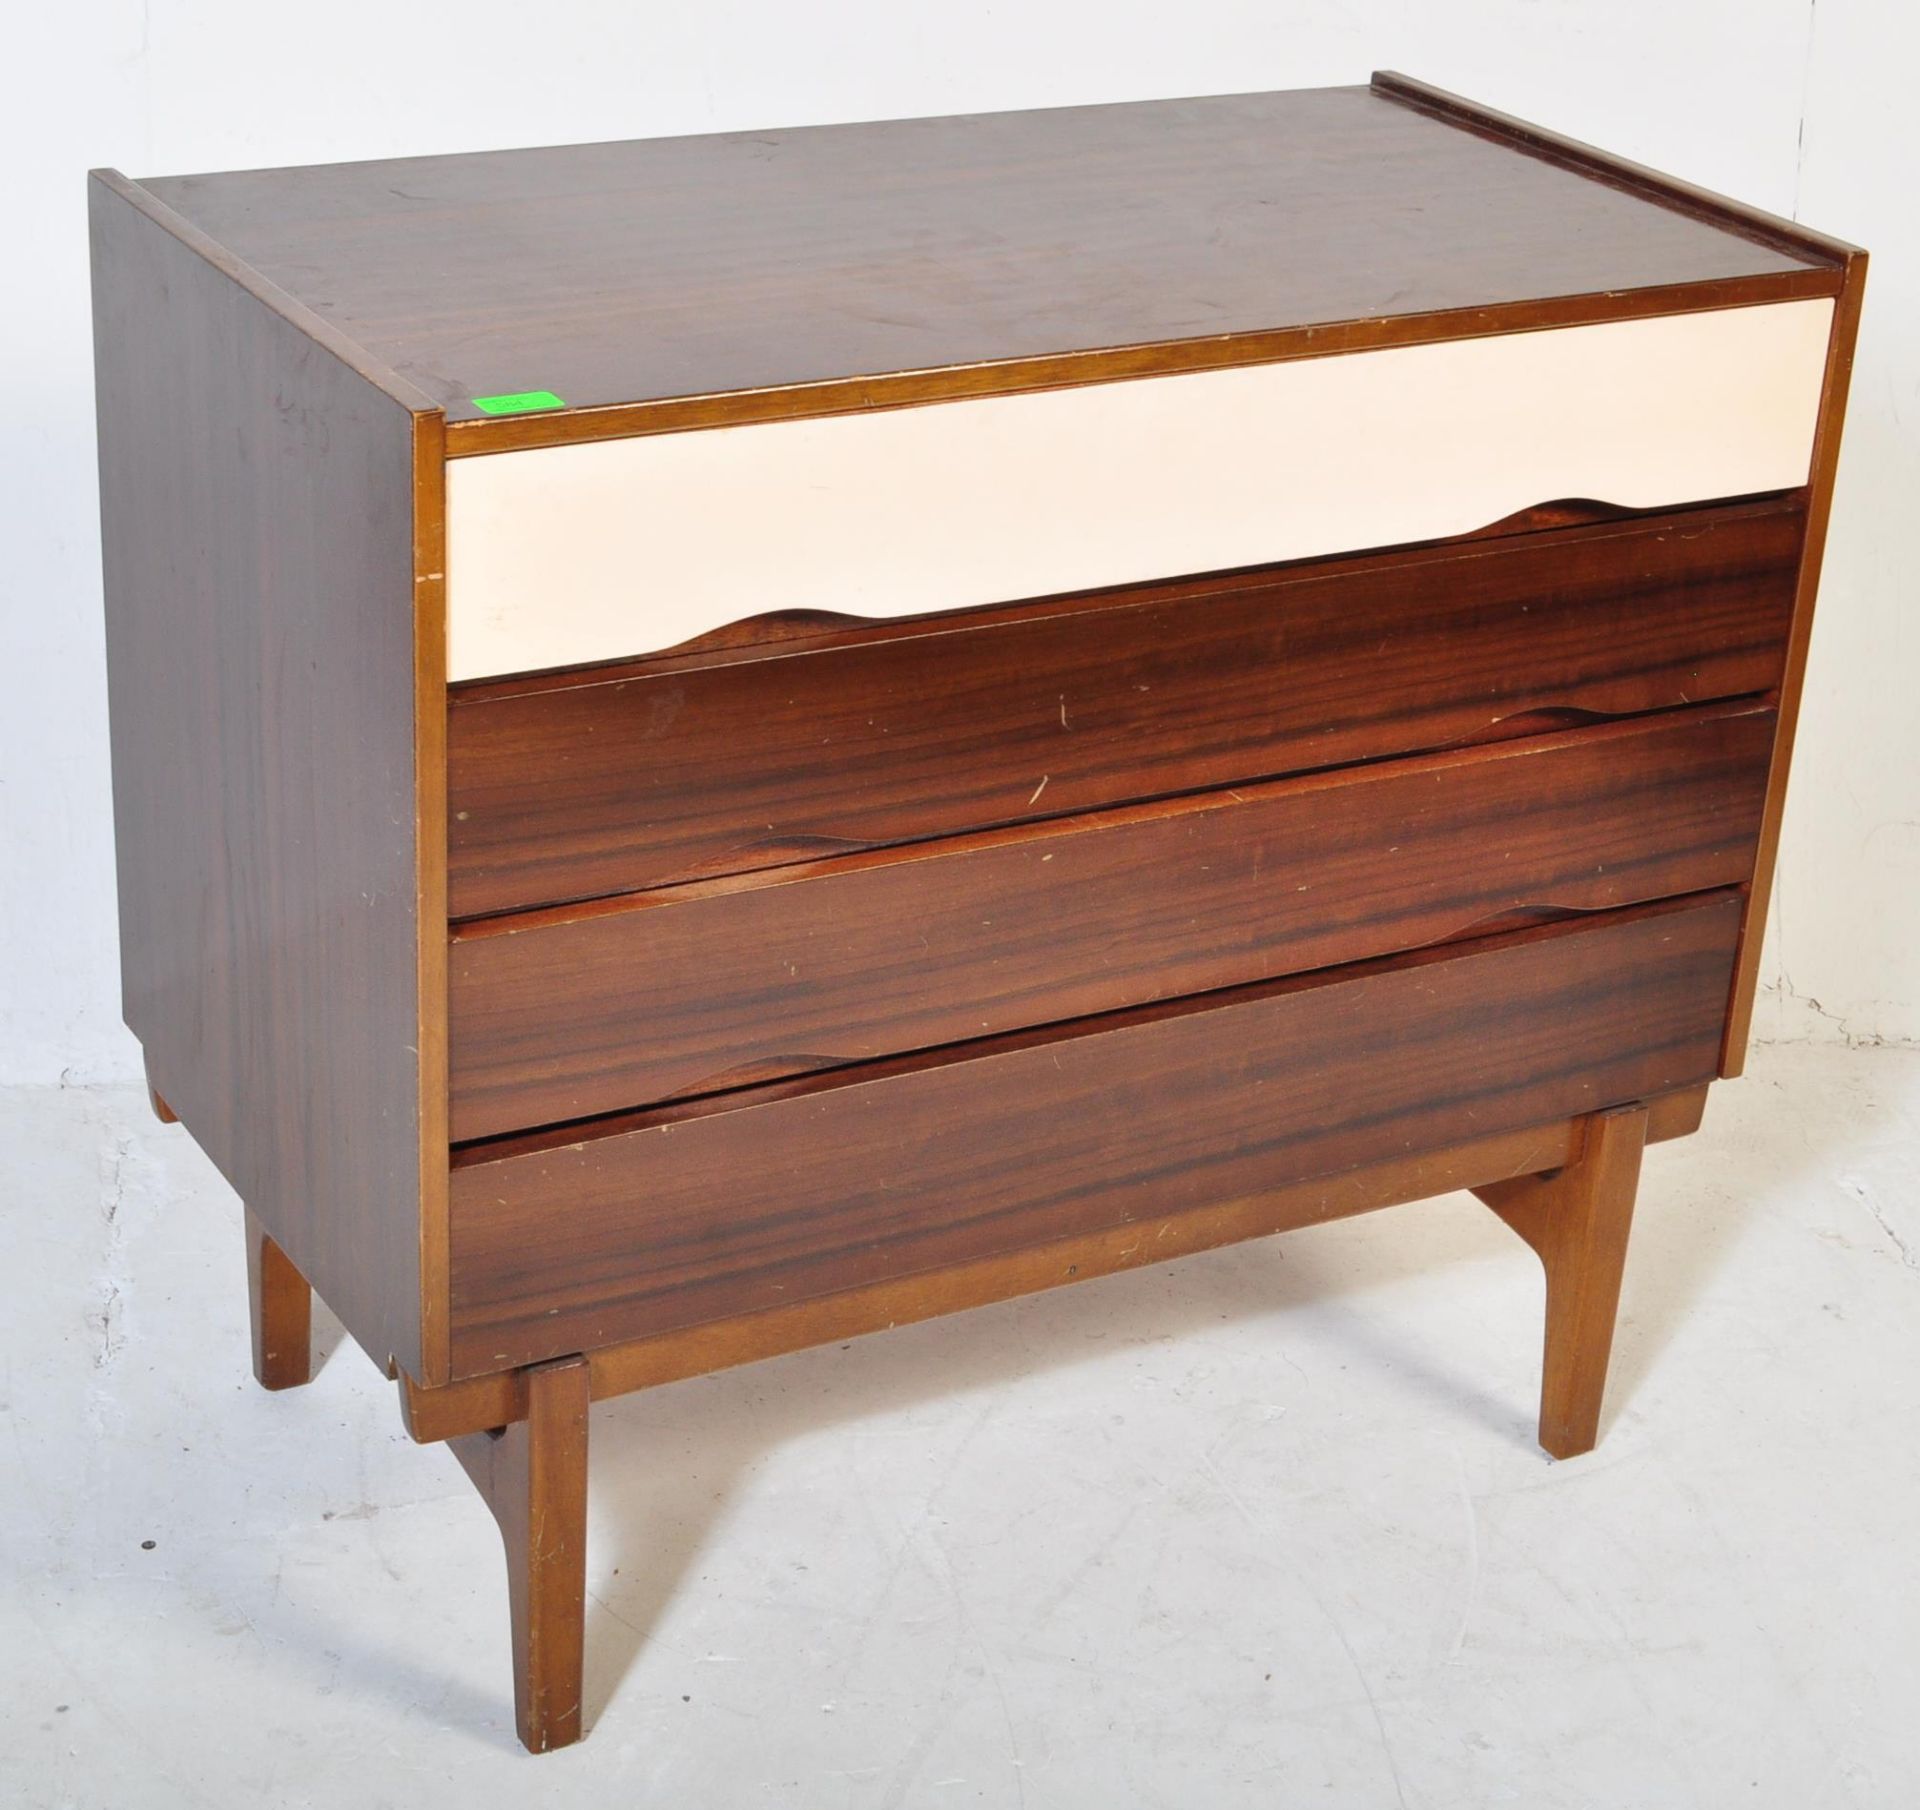 MID CENTURY TEAK WOOD TWO TONE CHEST OF DRAWERS - Image 2 of 4